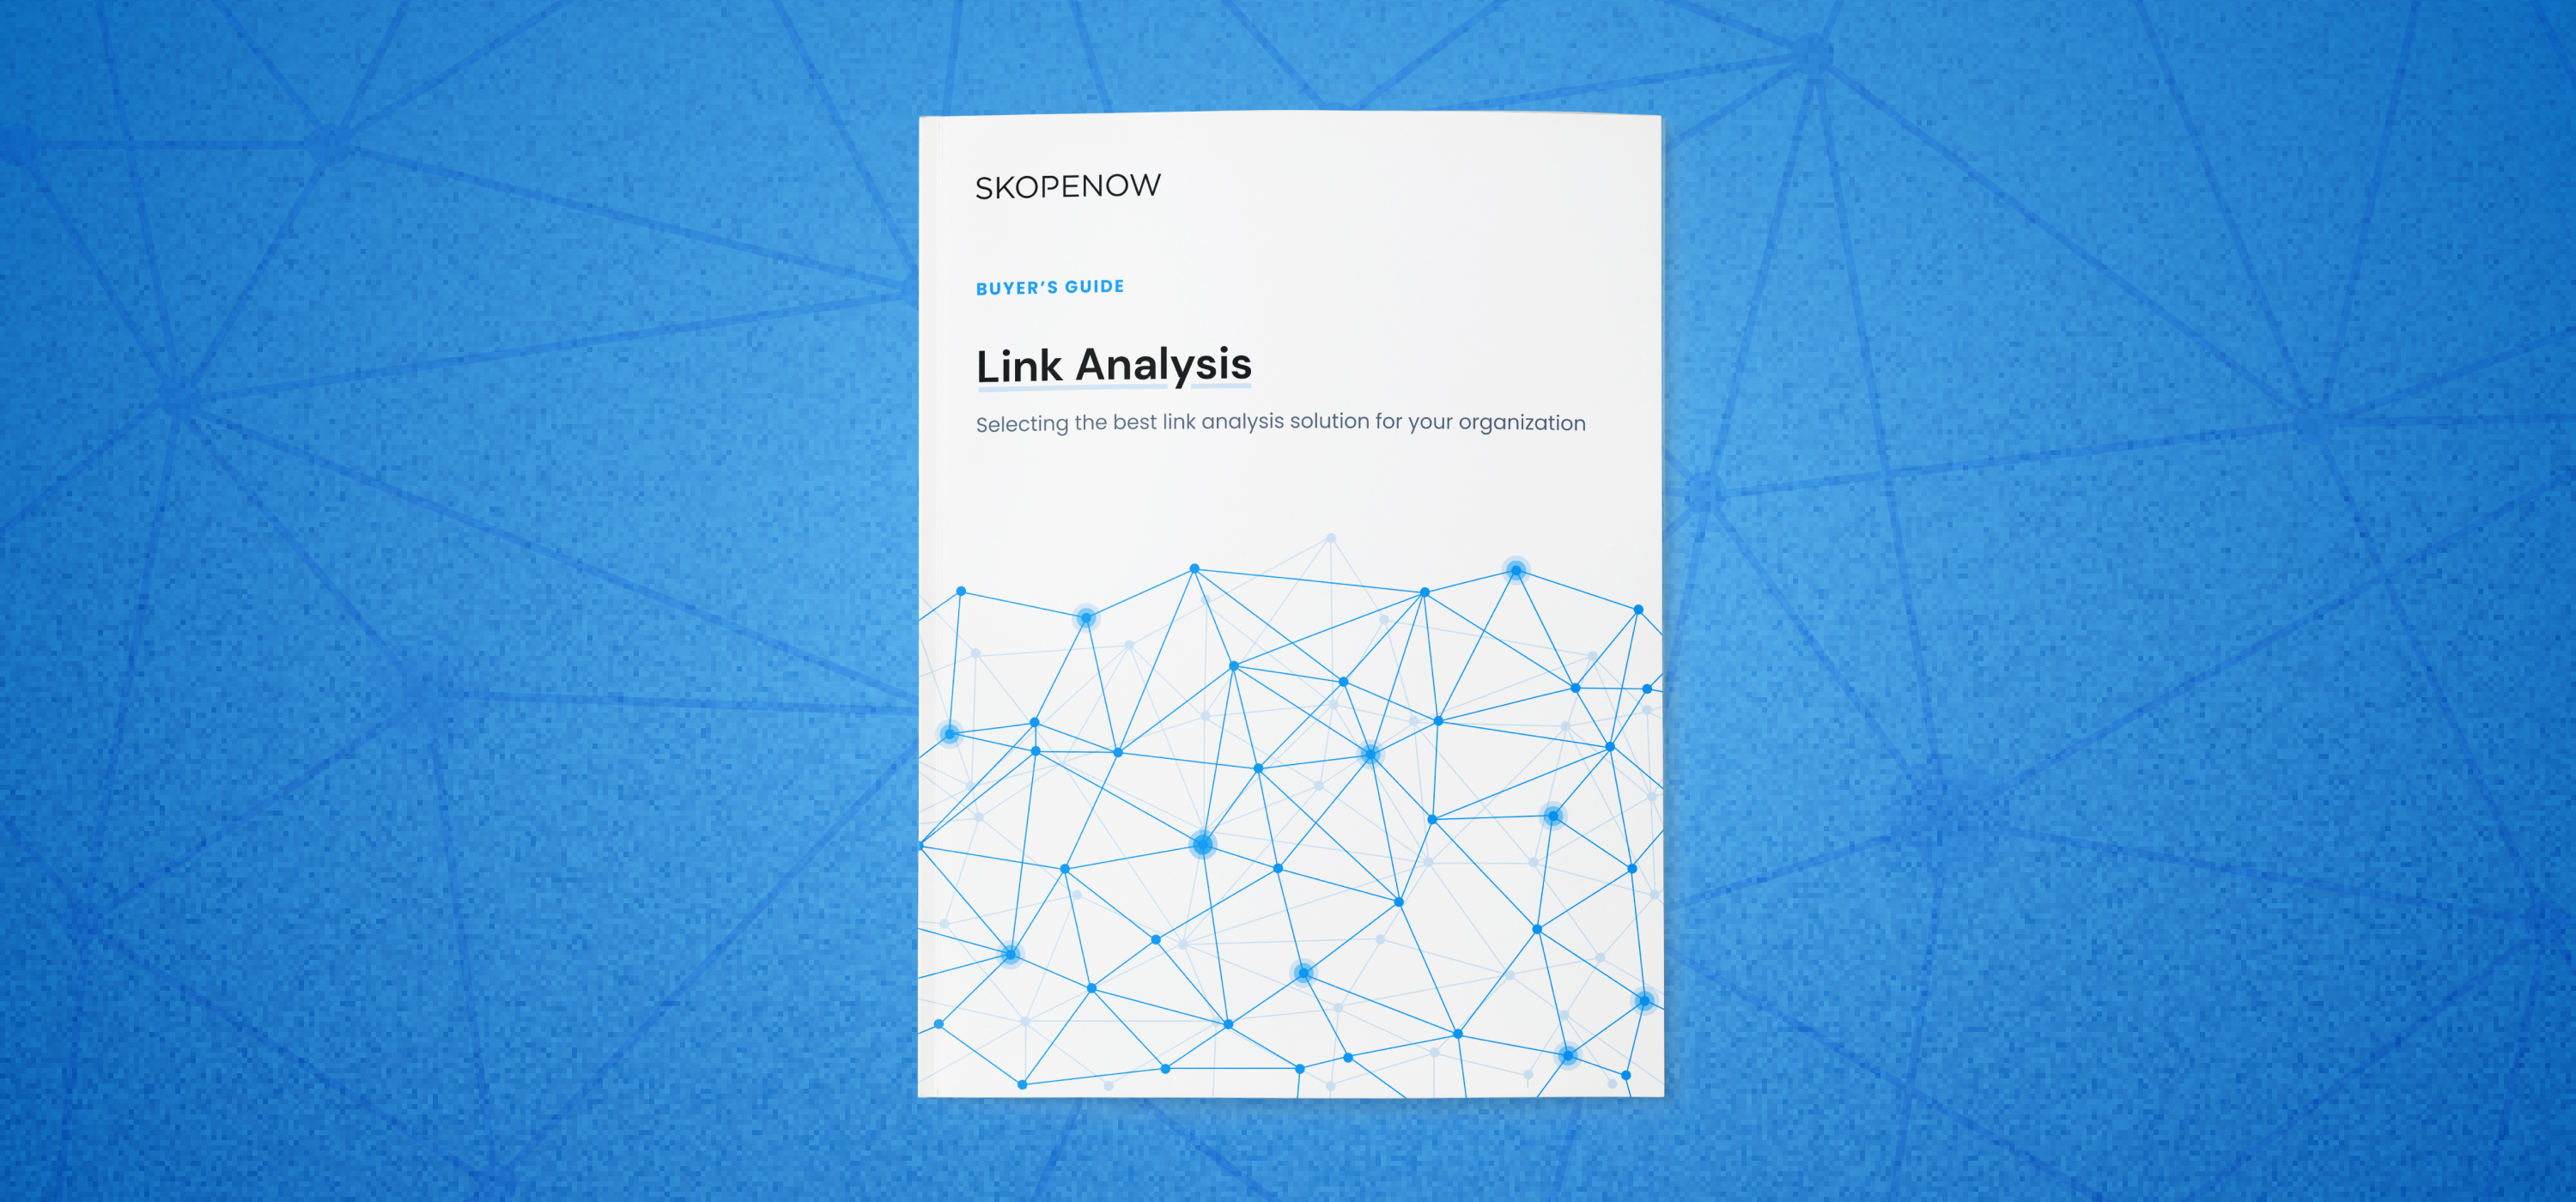 Skopenow's Link Analysis Buyer's Guide: From Complexity to Clarity—Choosing the Right Solution